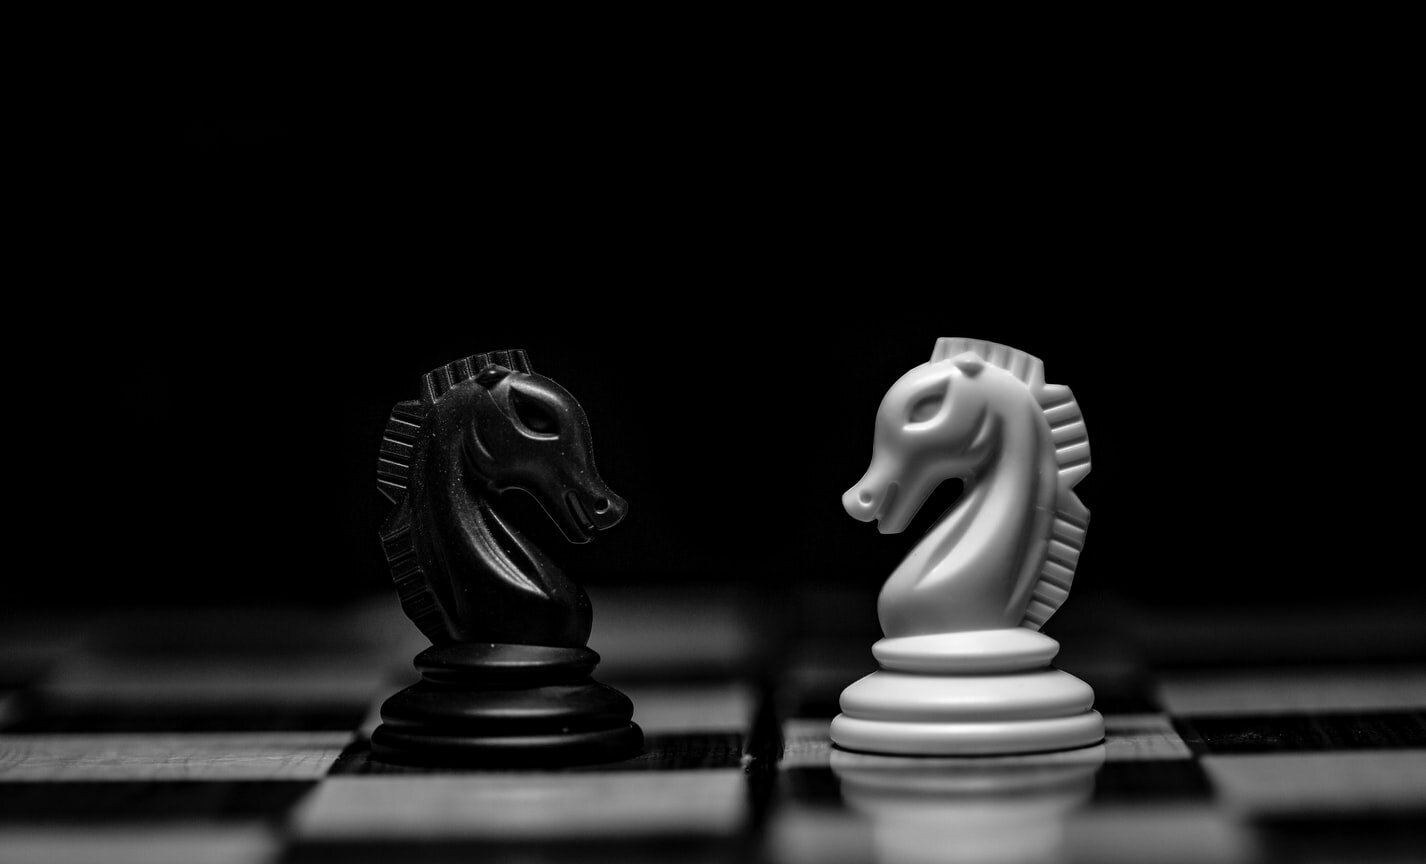 Play chess with your career